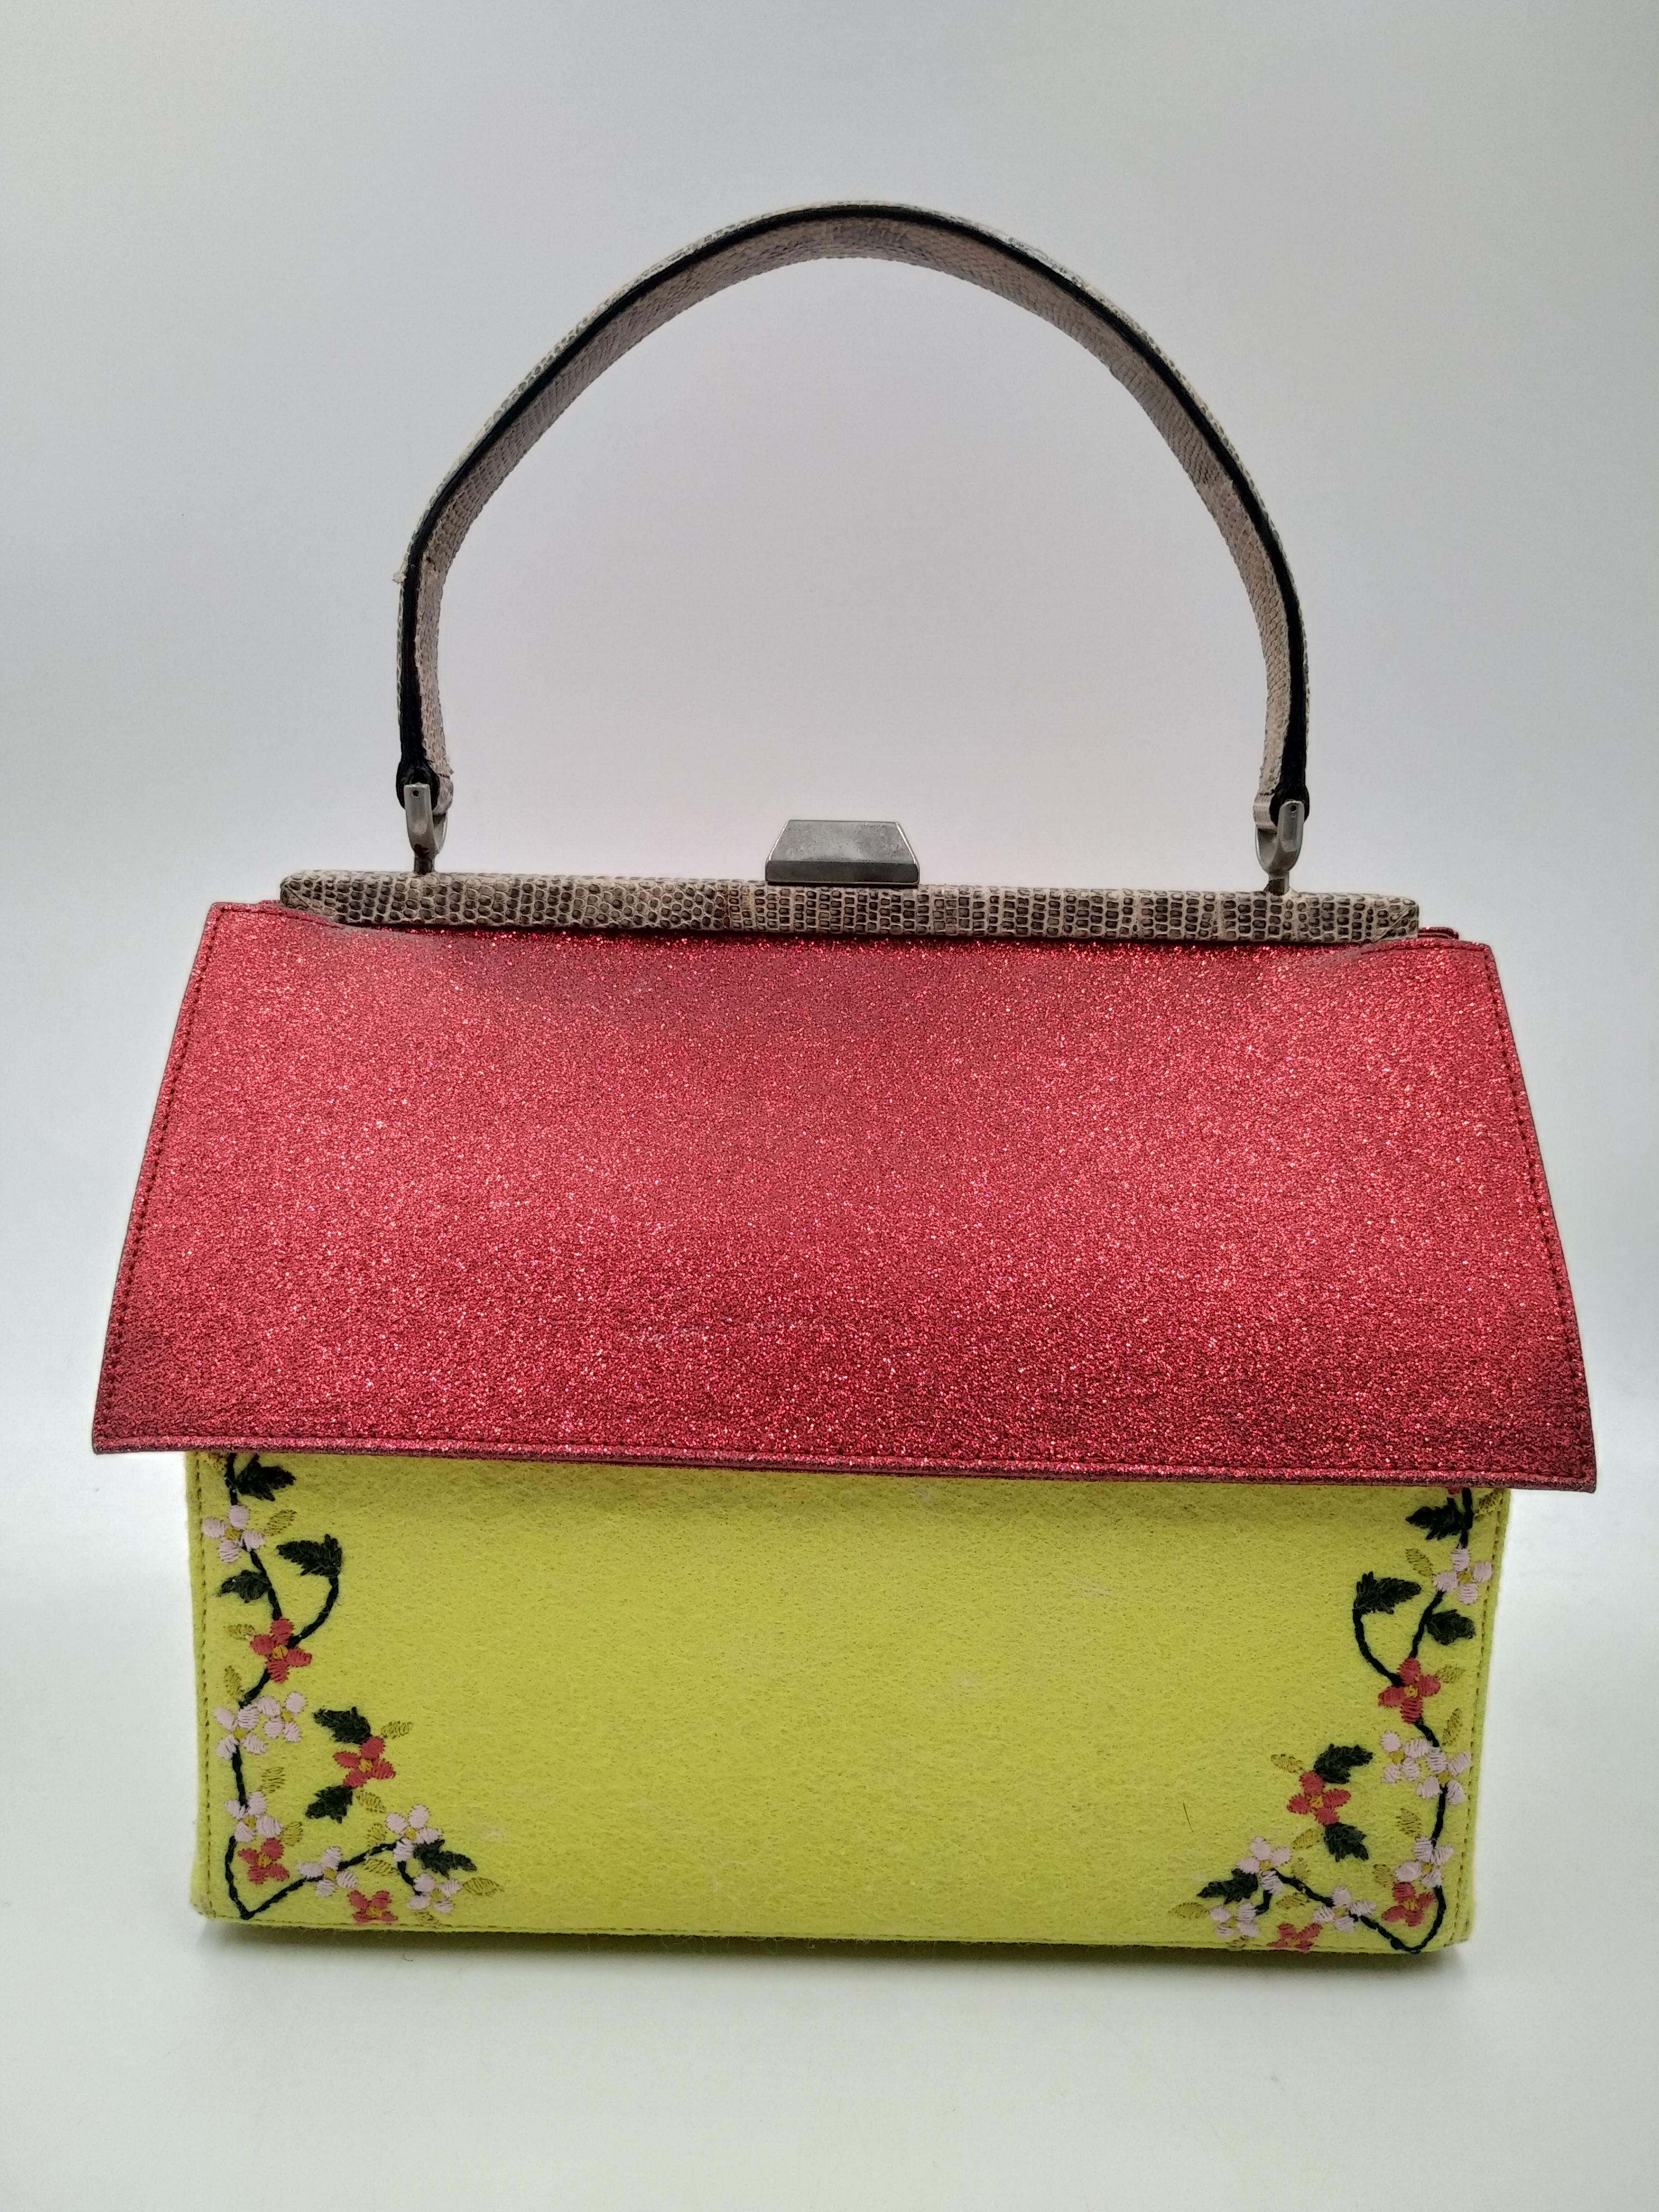 Moschino Hansel and Gretel gingerbread house bag, limited edition 2000
- 100% authentic Moschino
- Red lamé roof, pink python for the front door and yellow suede walls
- Front door that opens to conceal a mirror
- metal push-lock clasp
- protective